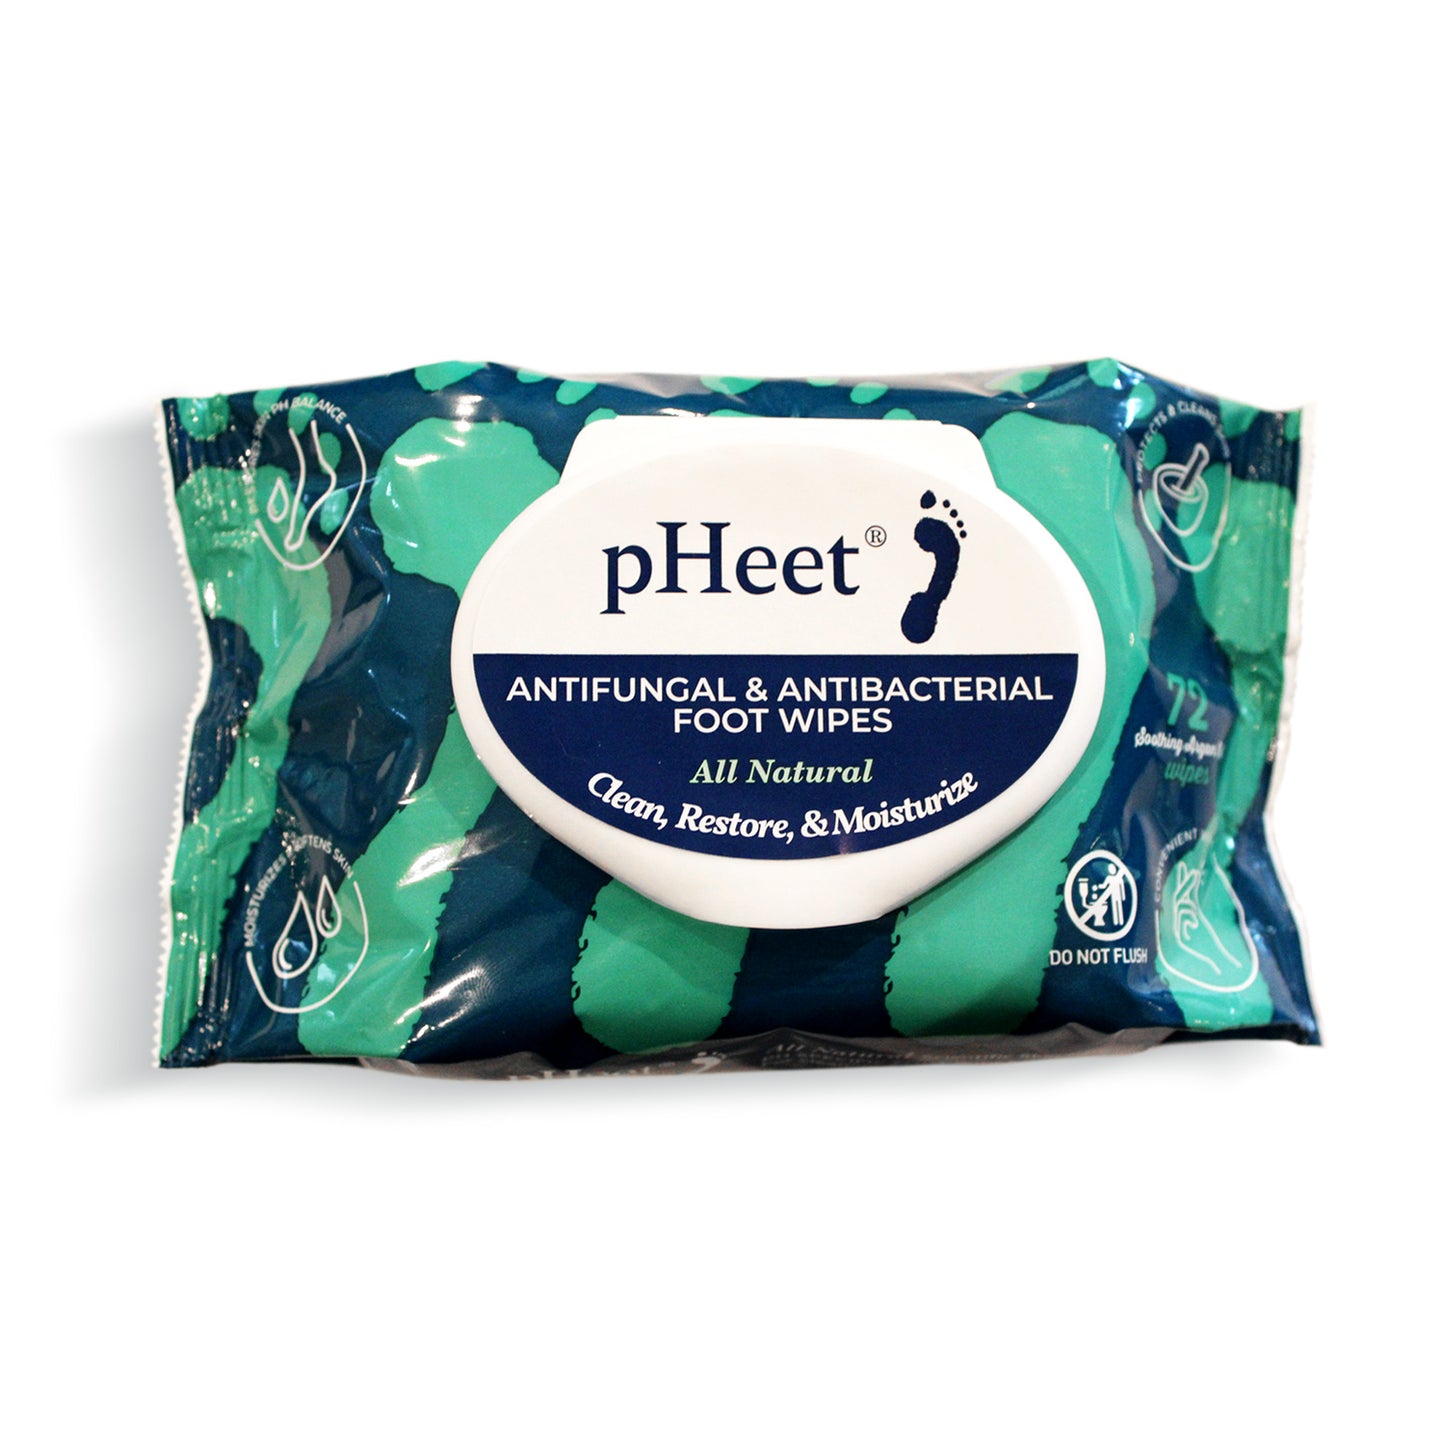 pHeet Foot Wipes front packaging photo